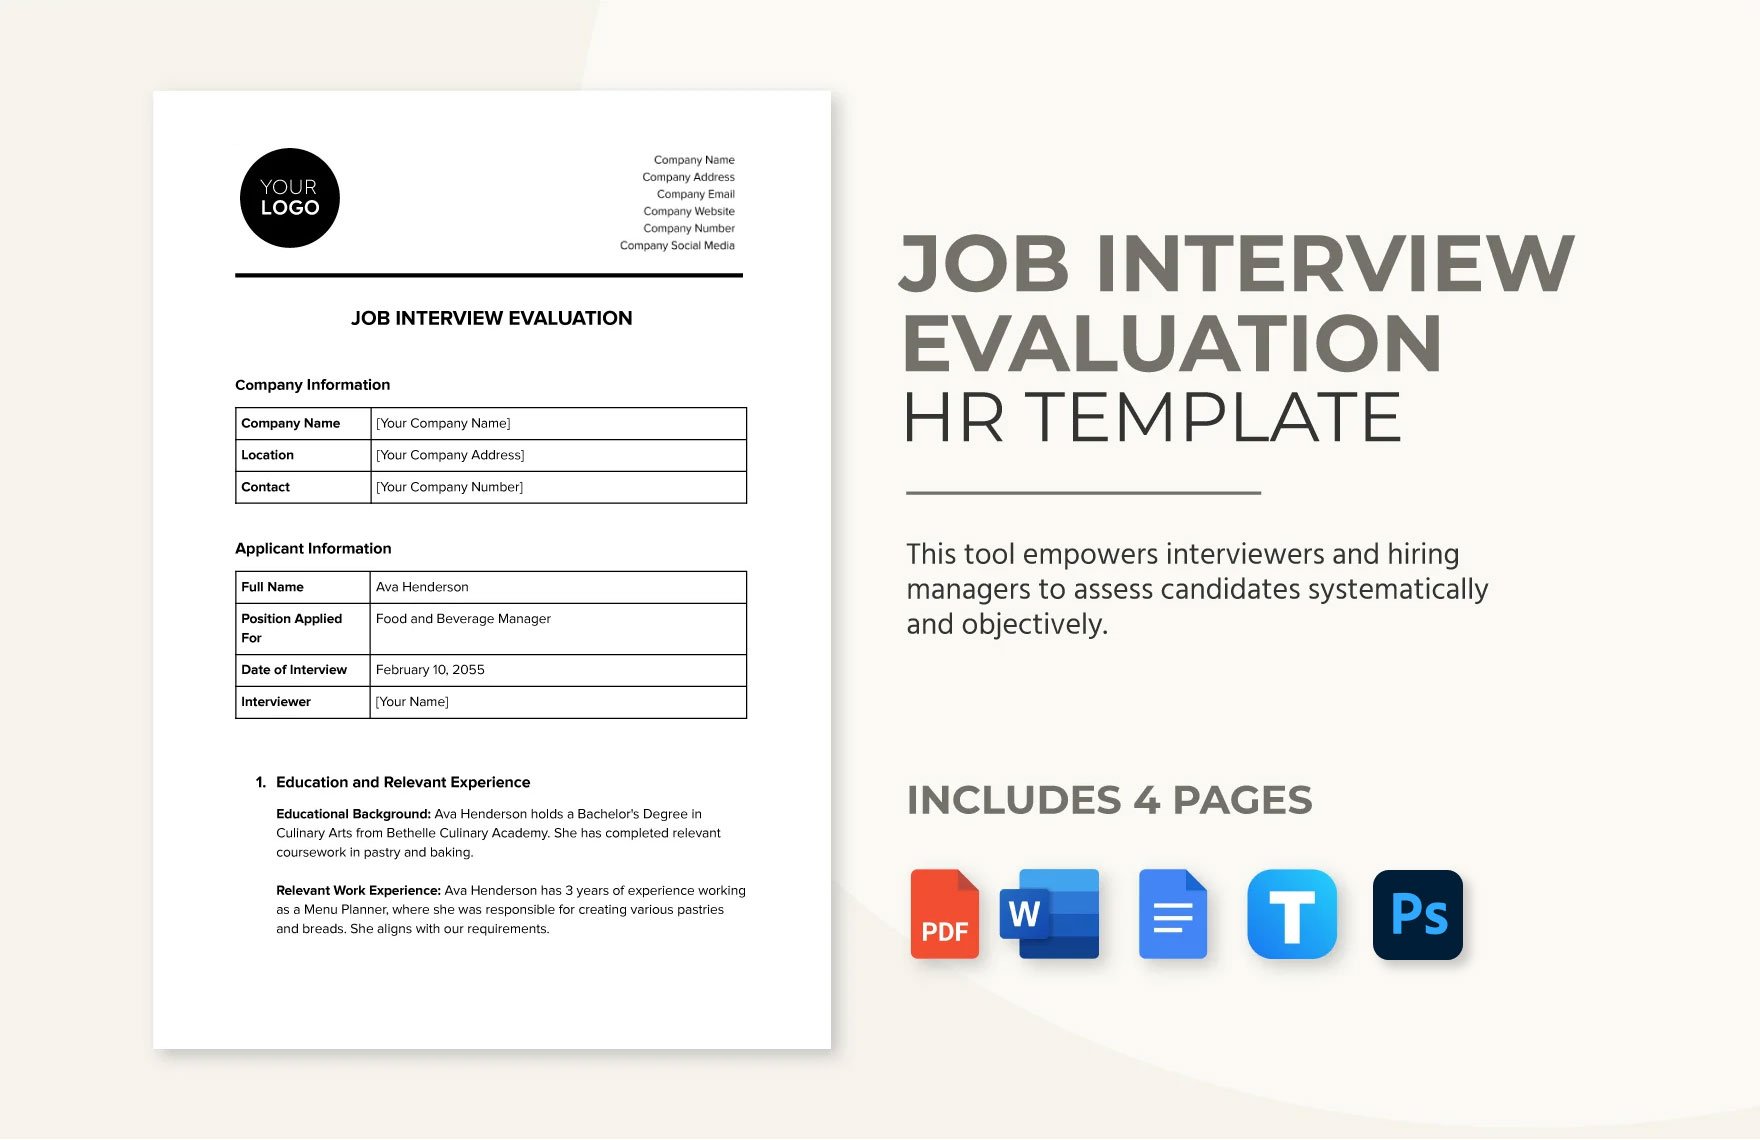 Job Interview Evaluation HR Template in Word, Google Docs, PDF, PSD